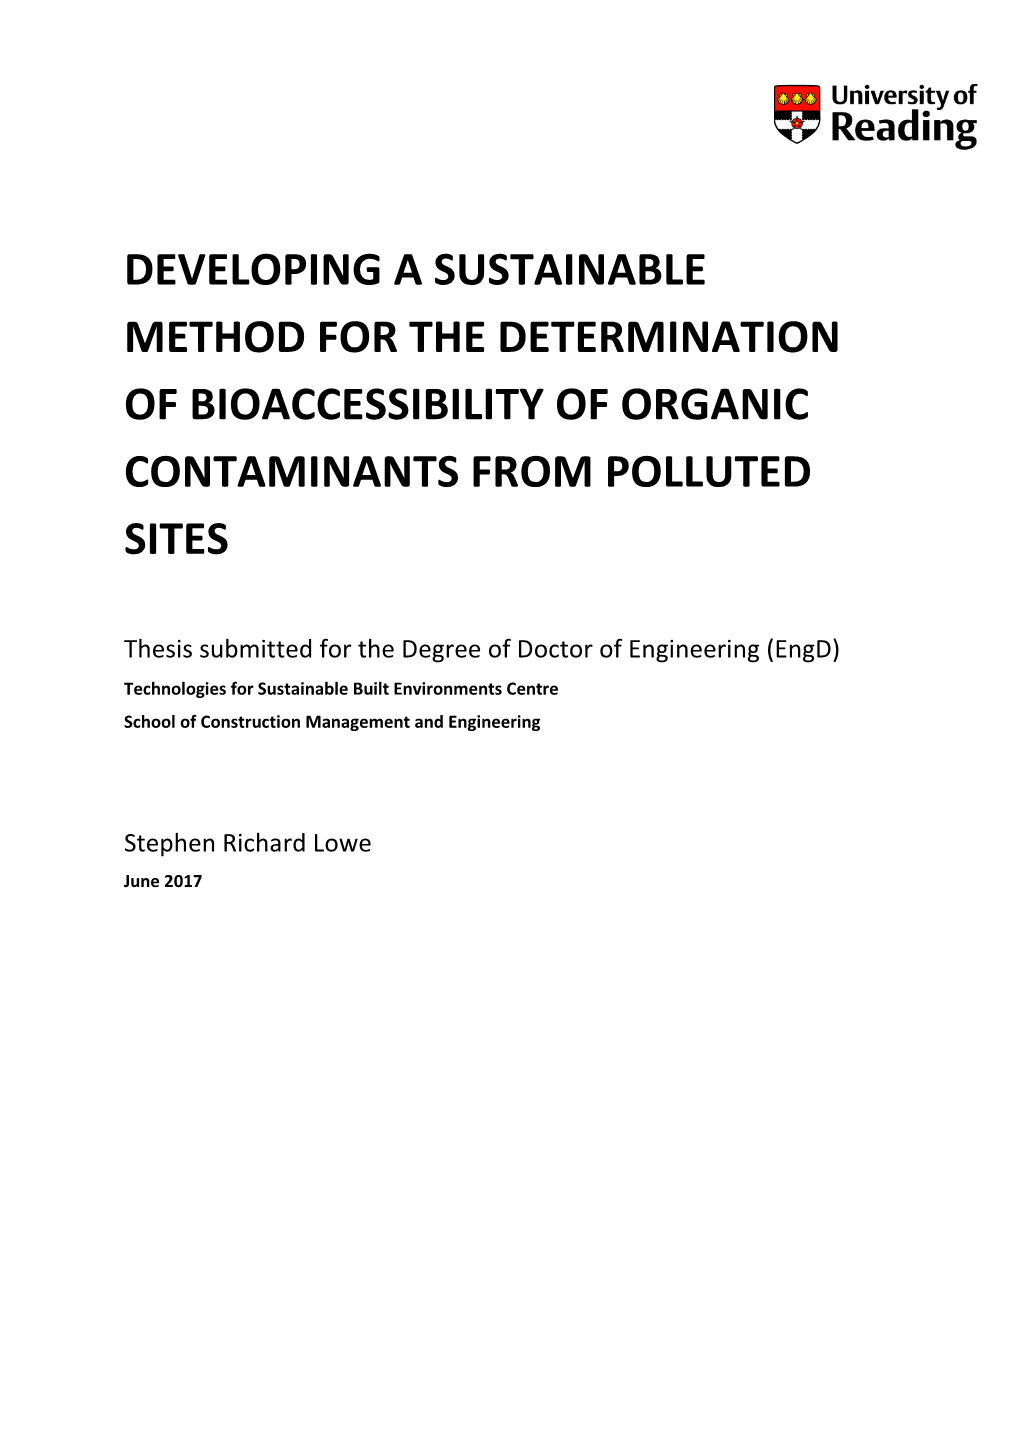 Developing a Sustainable Method for the Determination of Bioaccessibility of Organic Contaminants from Polluted Sites